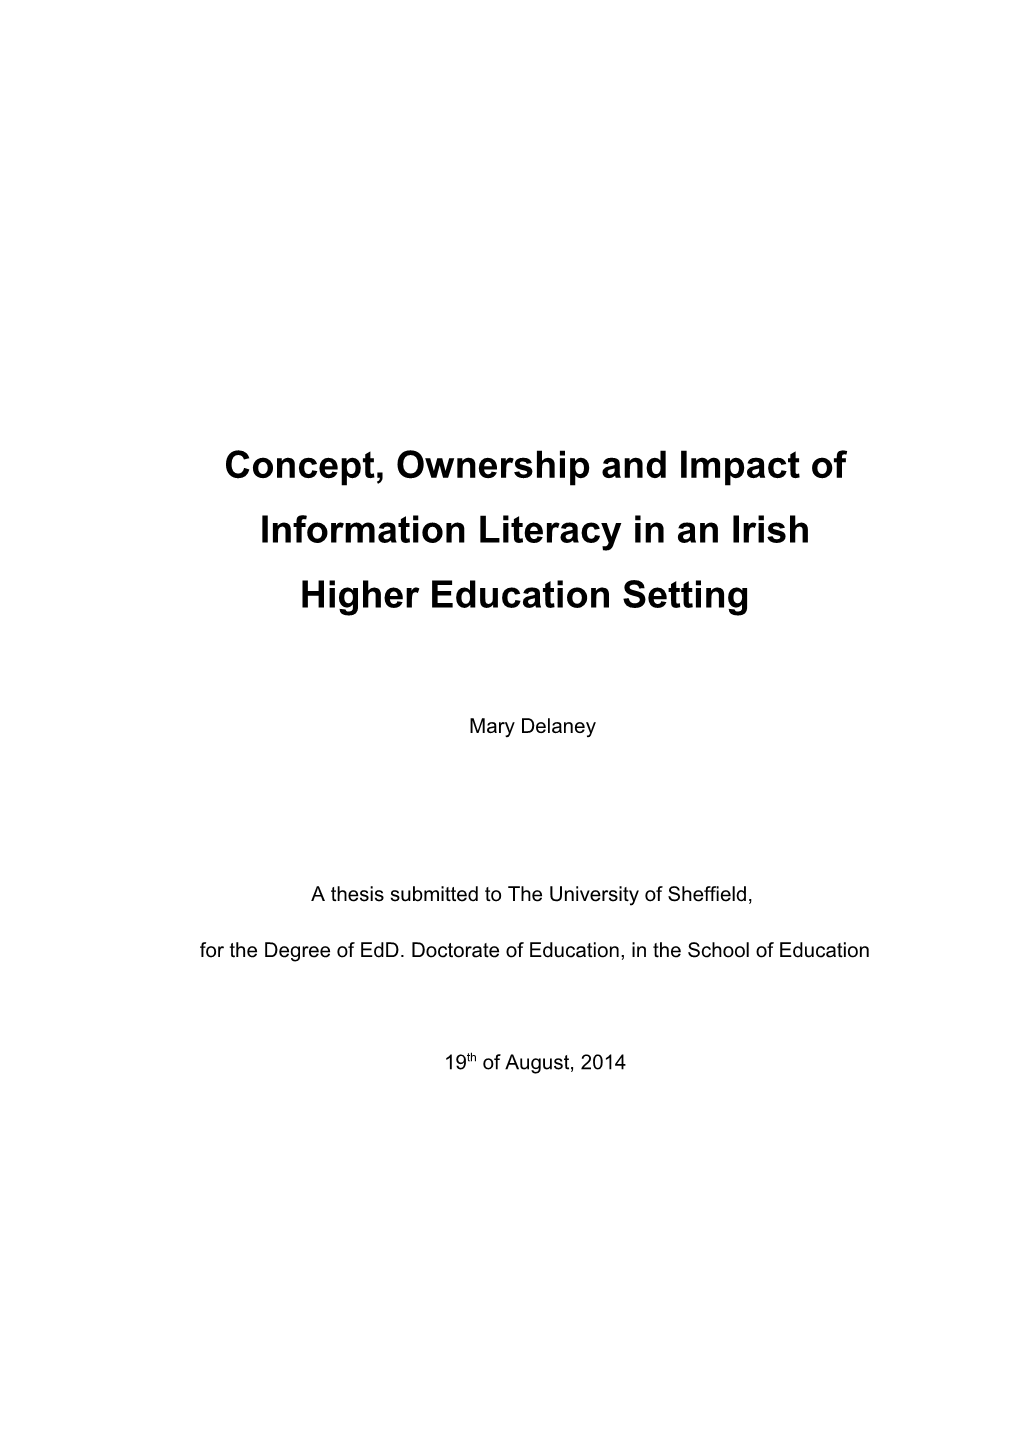 Concept, Ownership and Impact of Information Literacy in an Irish Higher Education Setting